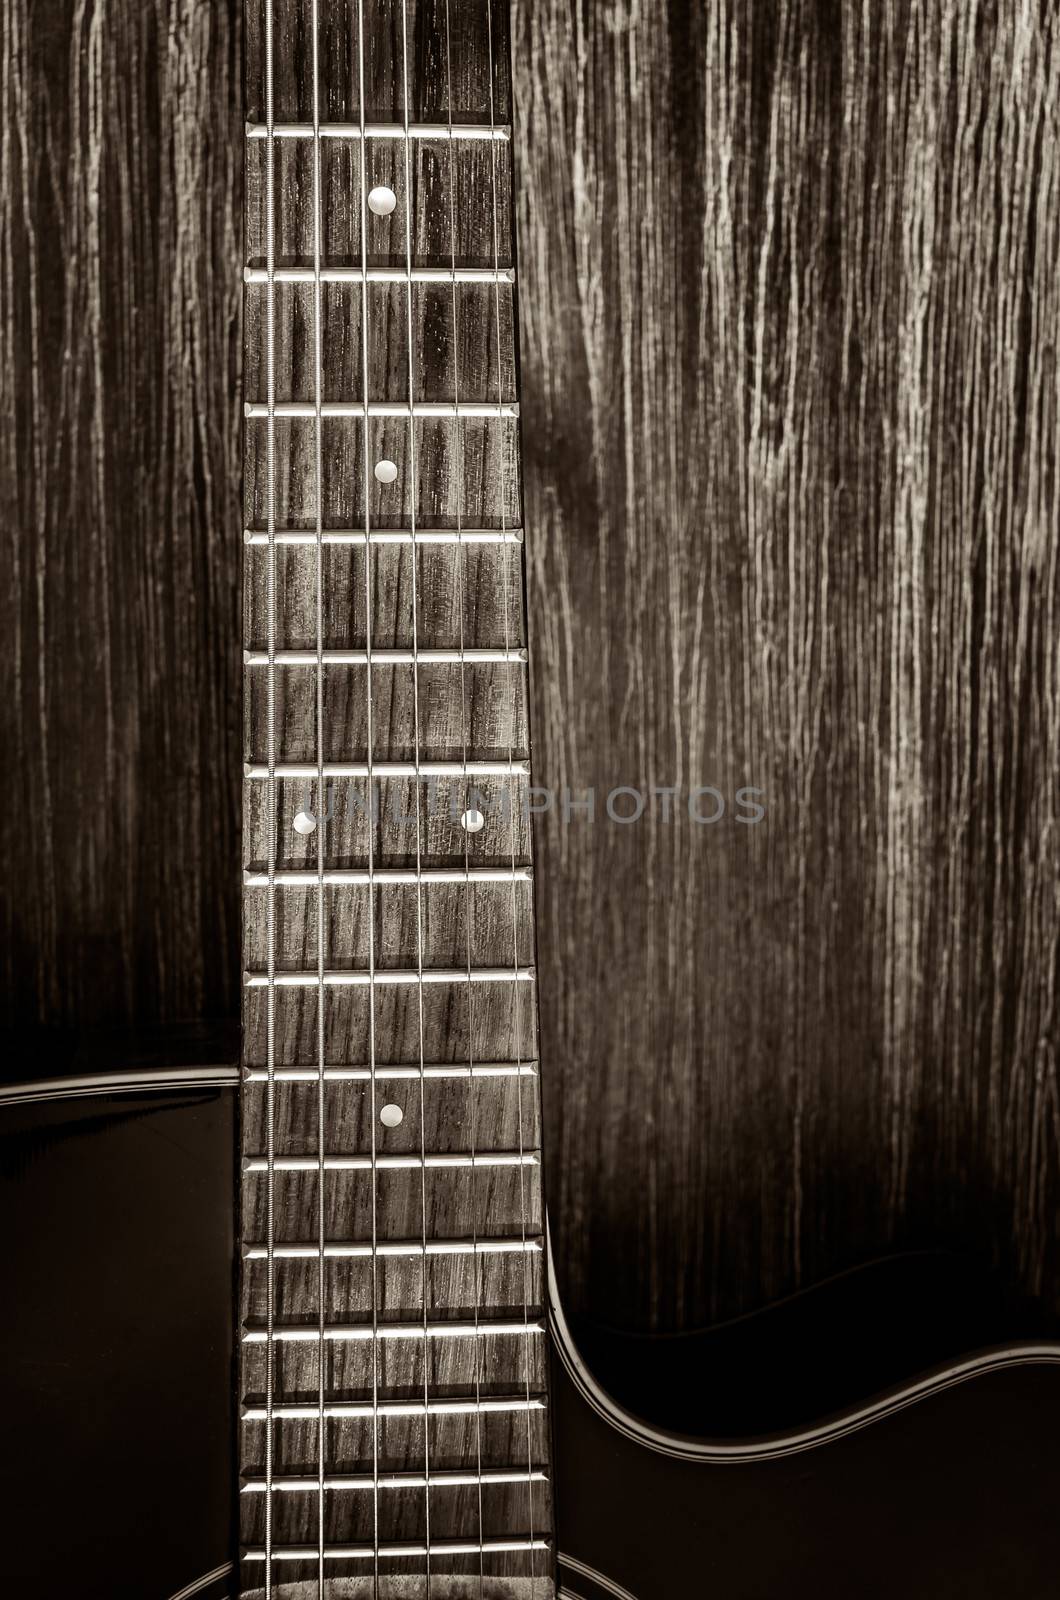 Detail of acoustic guitar in vintage style on wood background by martinm303